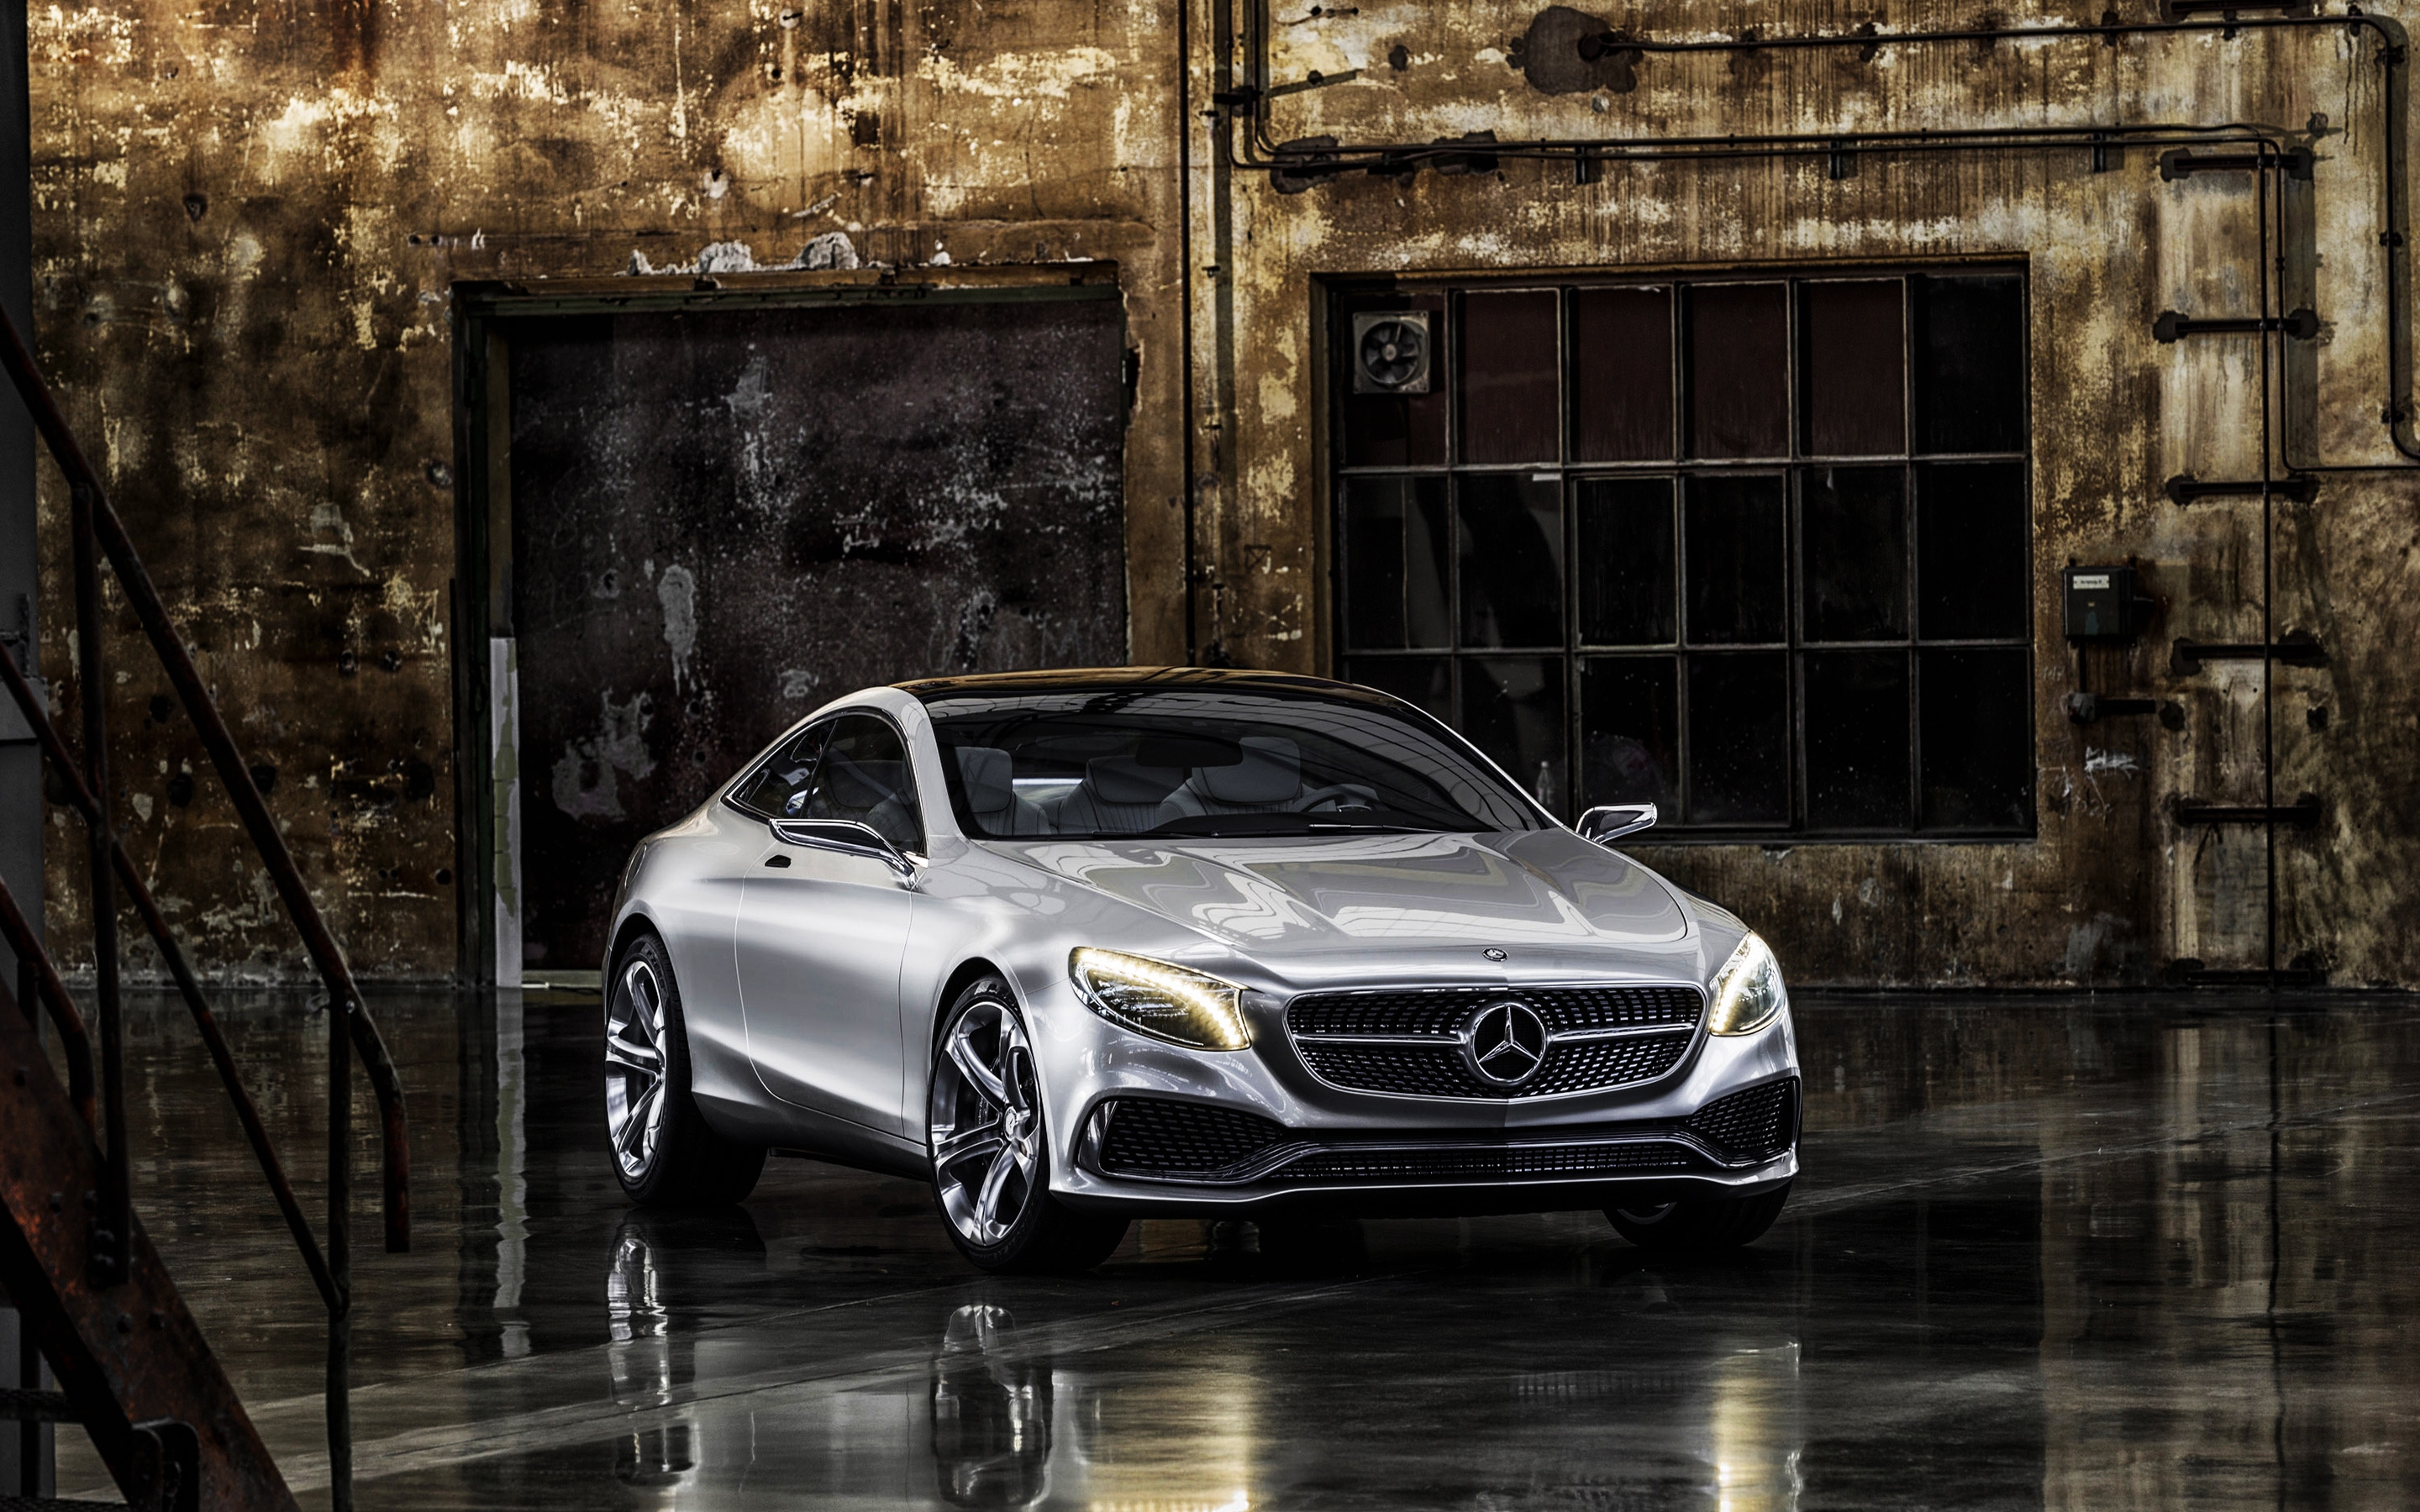 Mercedes S Concept for 2880 x 1800 Retina Display resolution